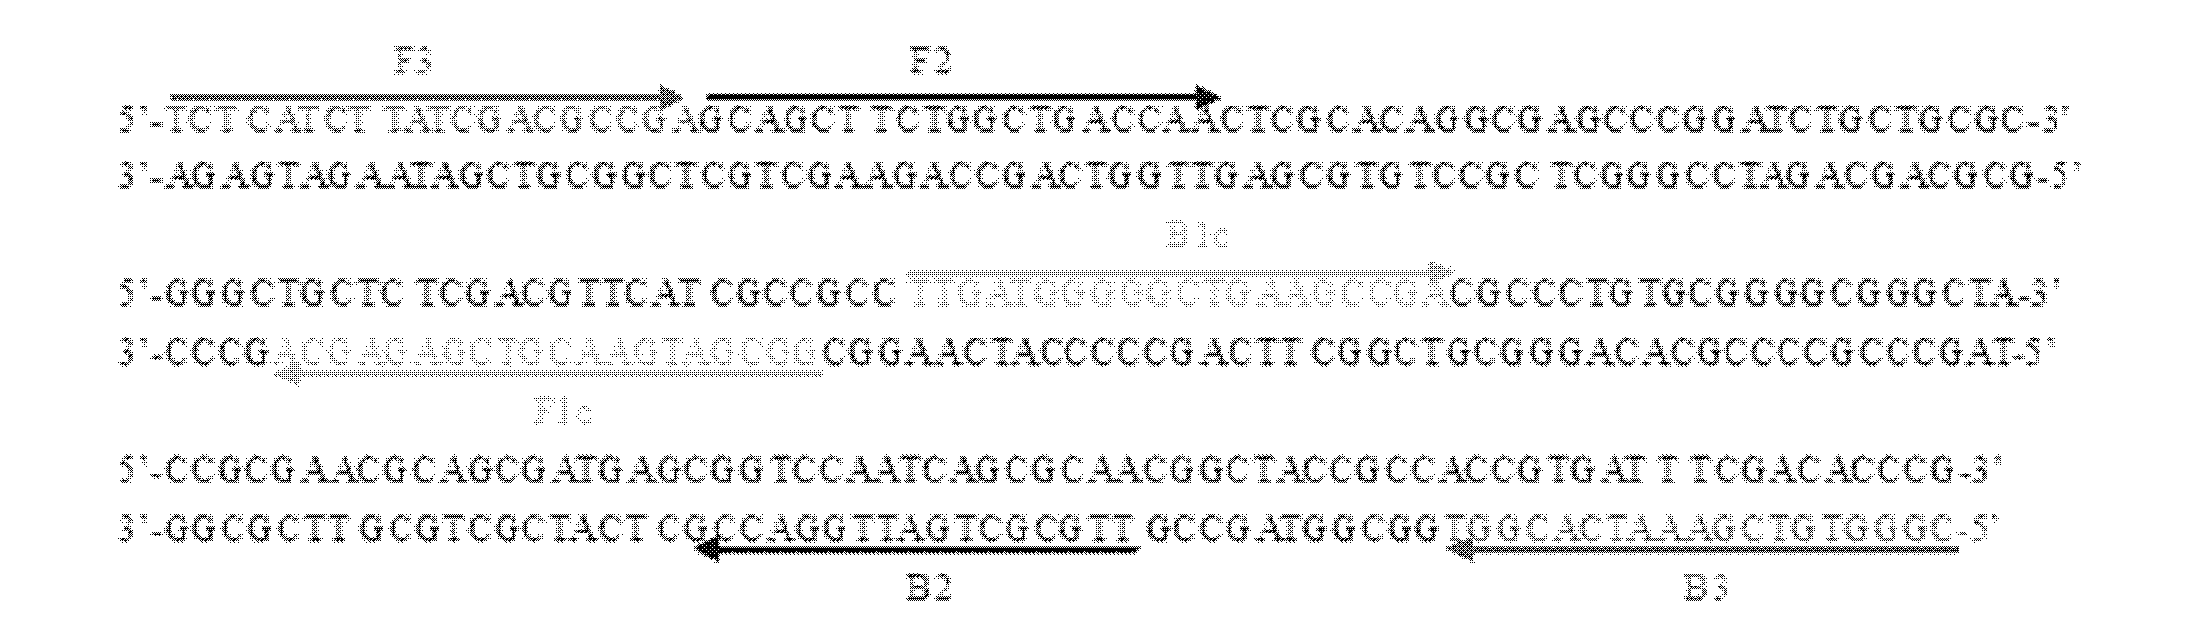 Isothermal nucleic acid amplification technique based kit for diagnosis of tuberculosis